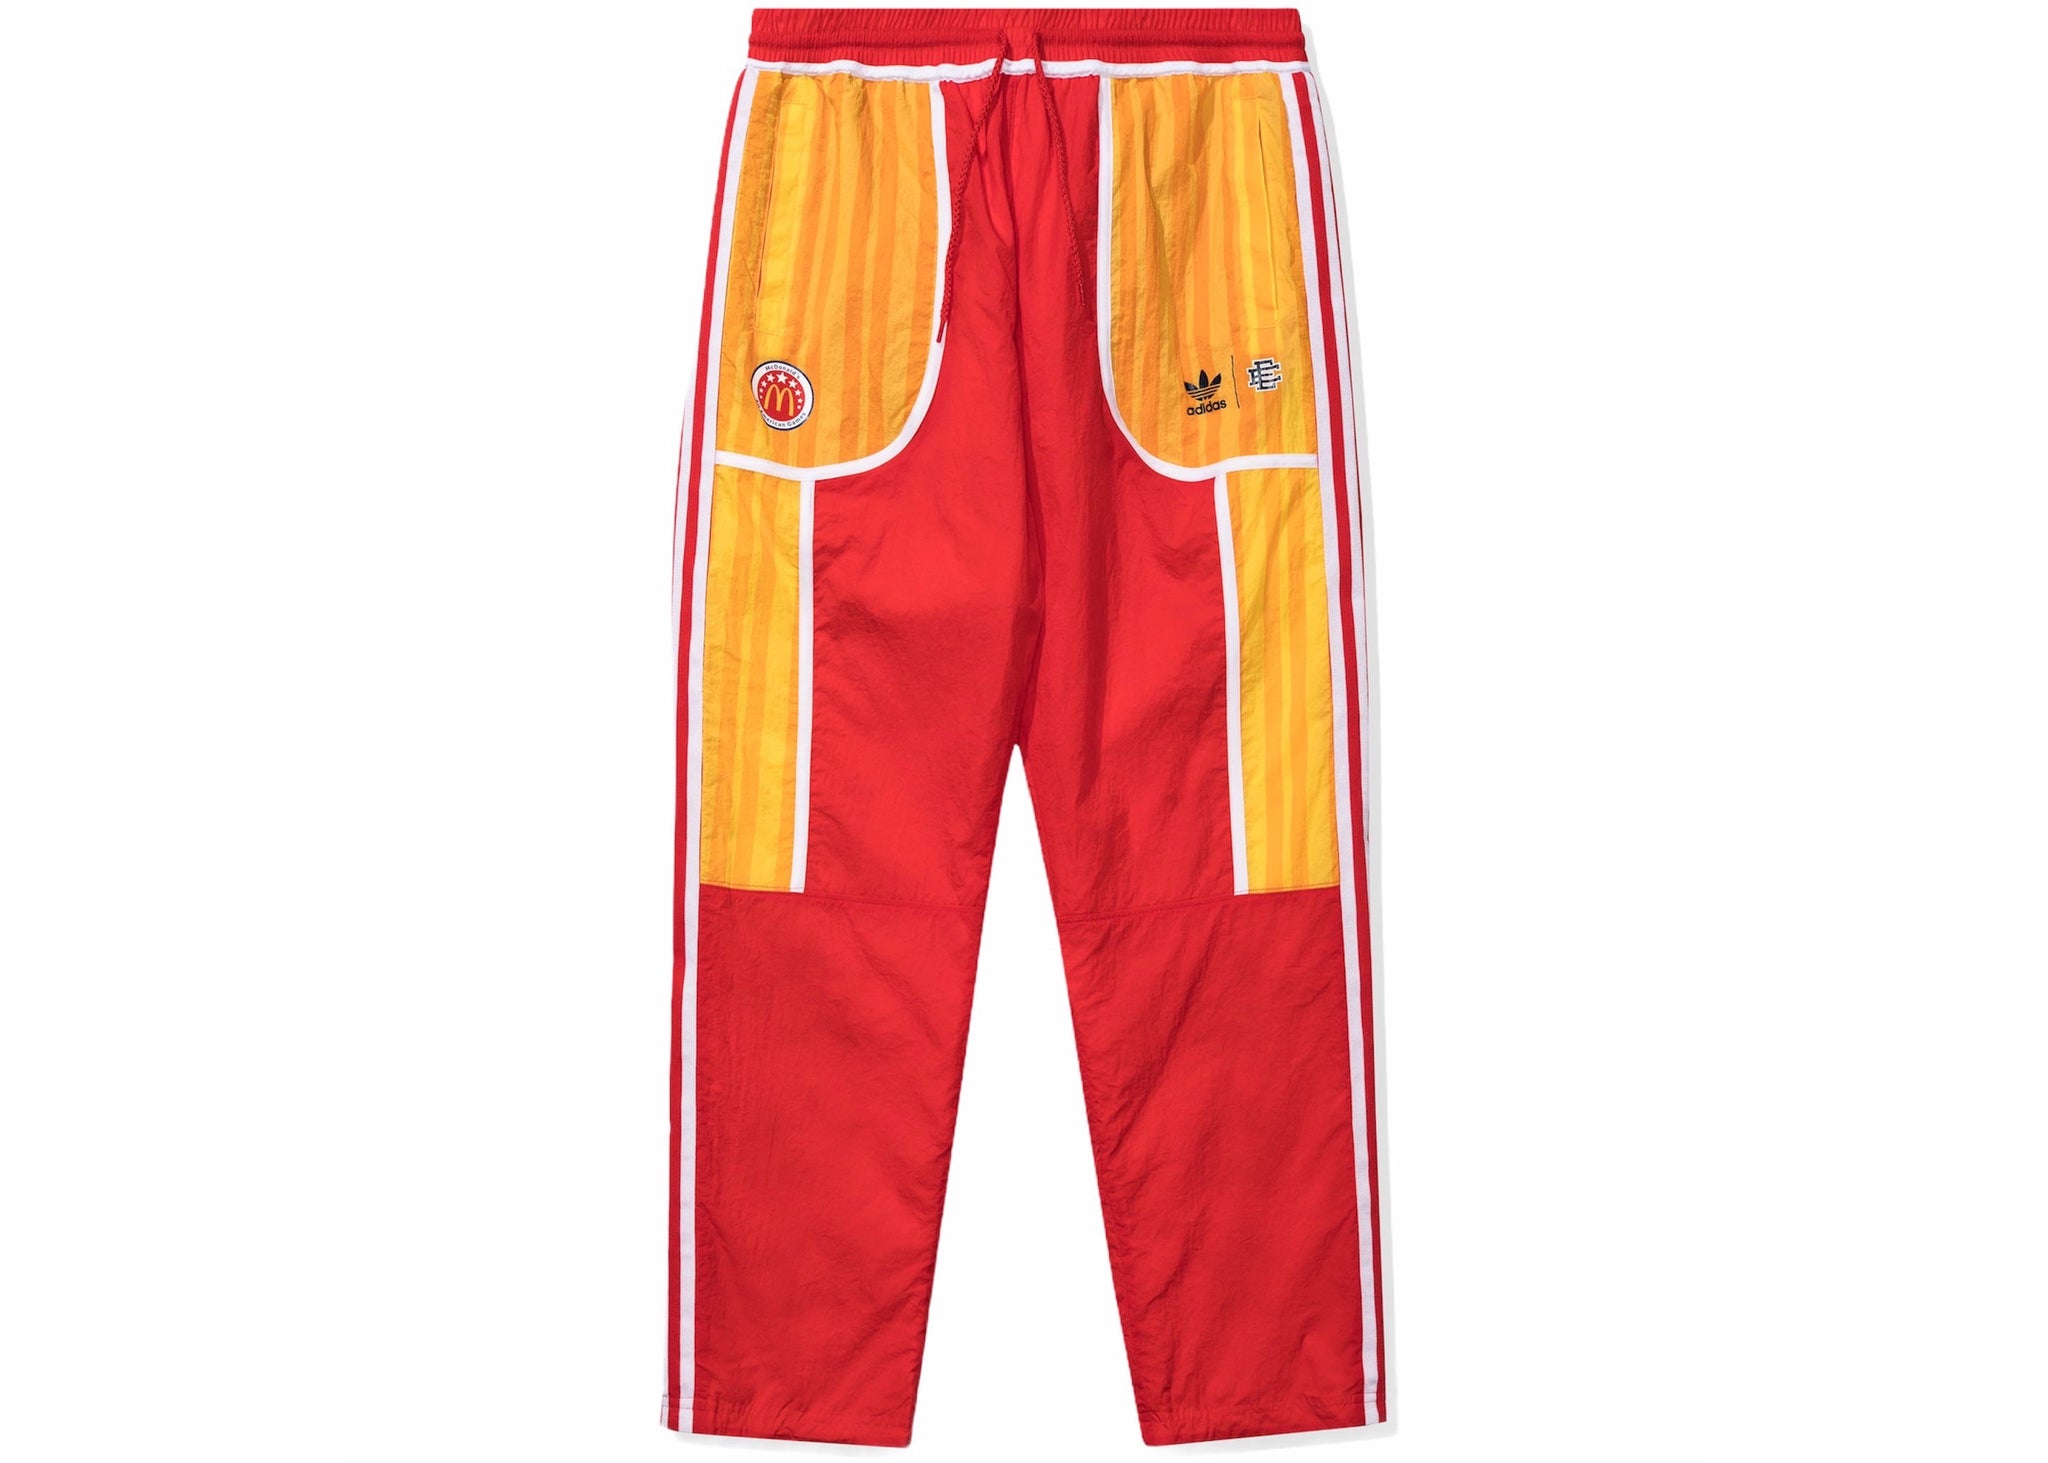 Adidas x Eric McDonald's All-American Reversible Track Pants “ – Piece and Sole